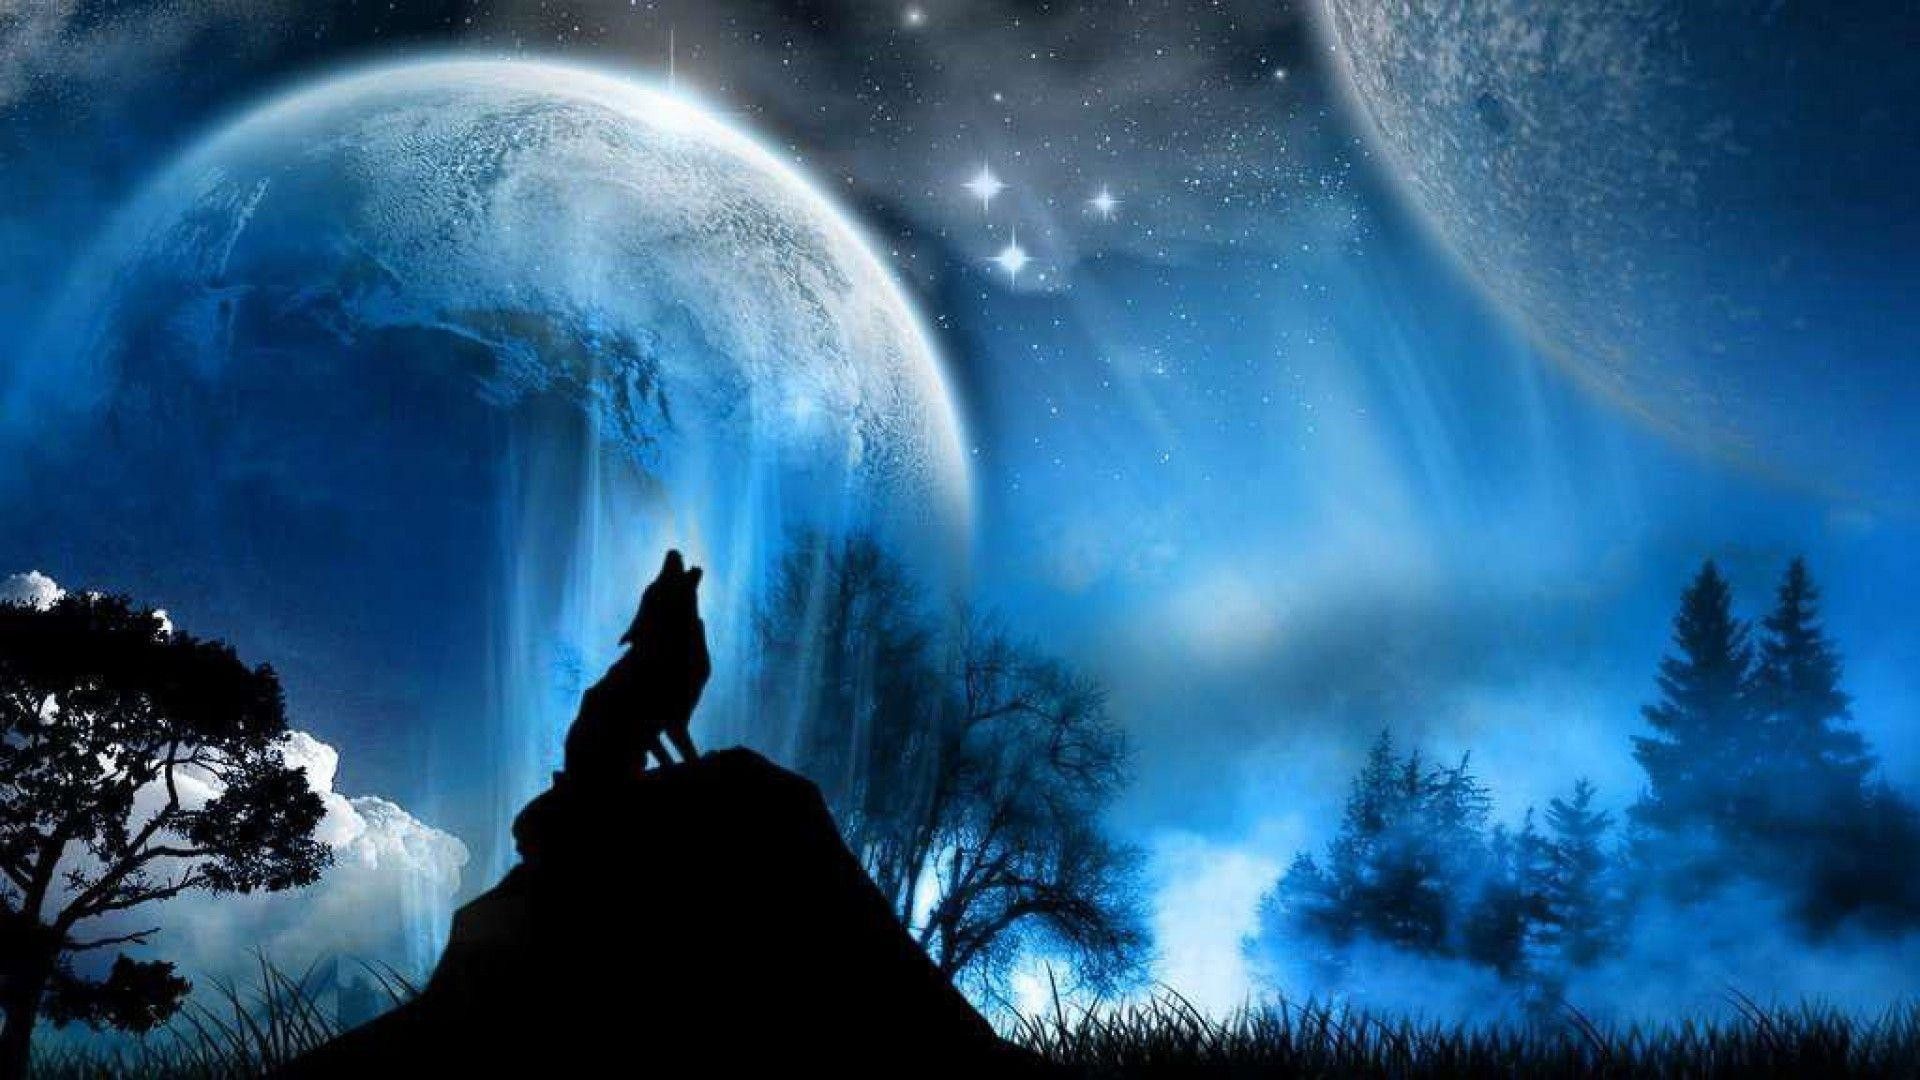 560253 1920x1080 wolf hd image - Rare Gallery HD Wallpapers